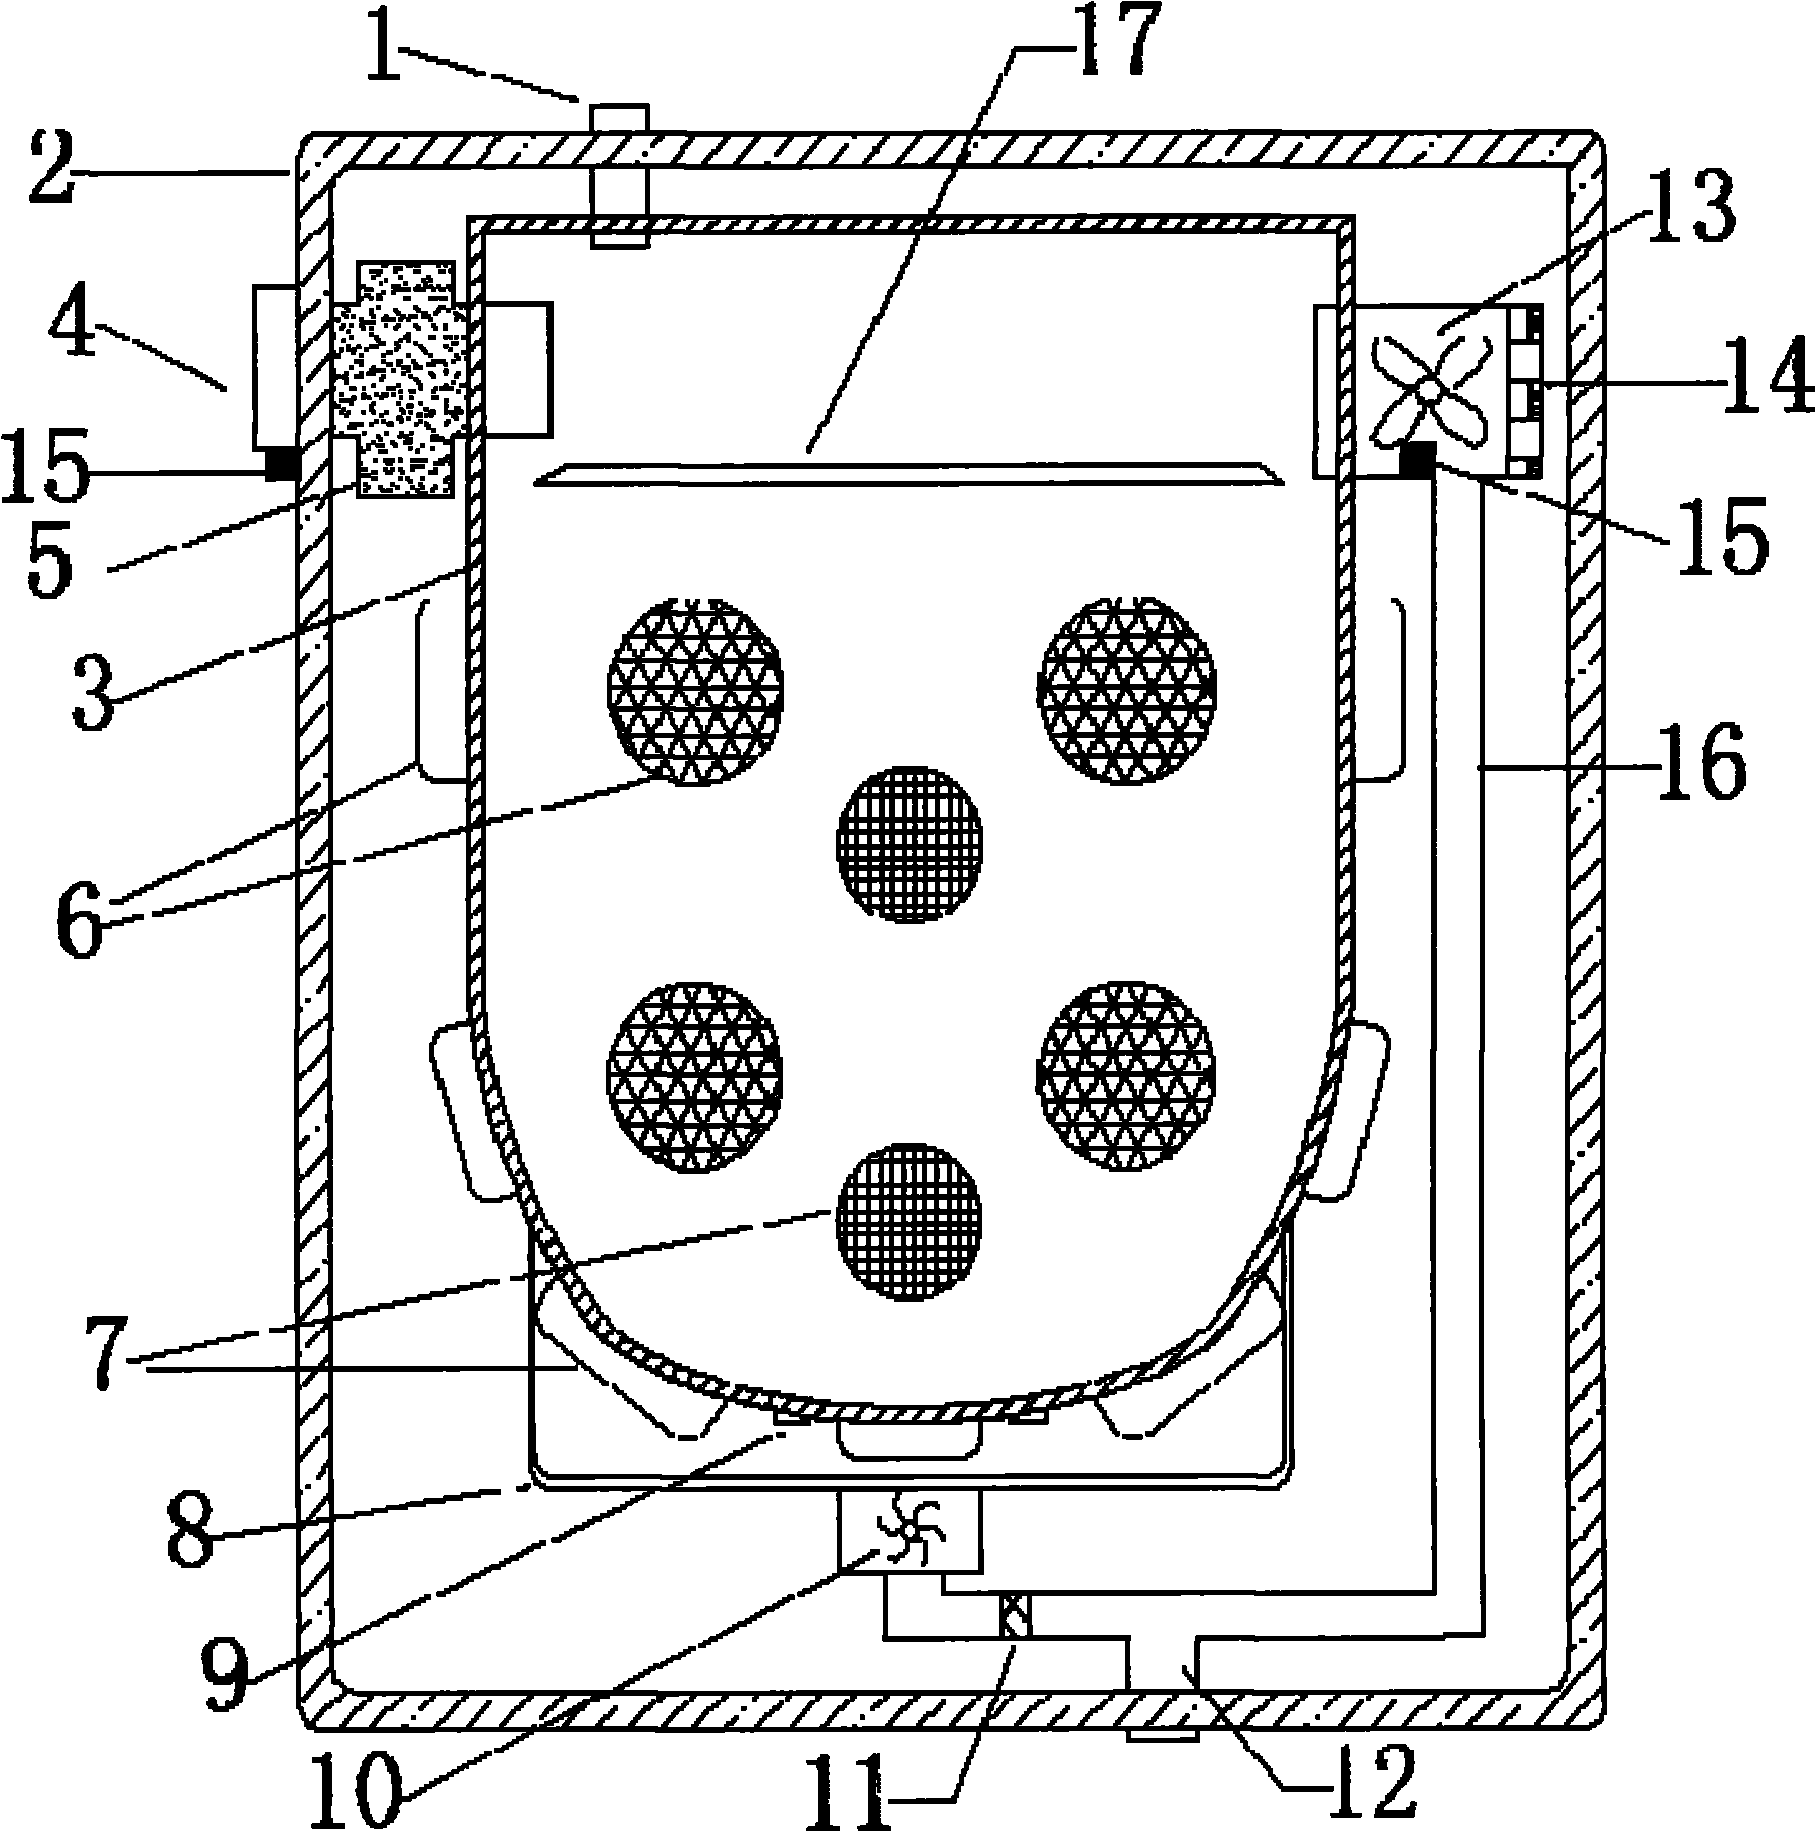 Multifrequency phased ultrasonic clothes cleaning and dehydration method and device